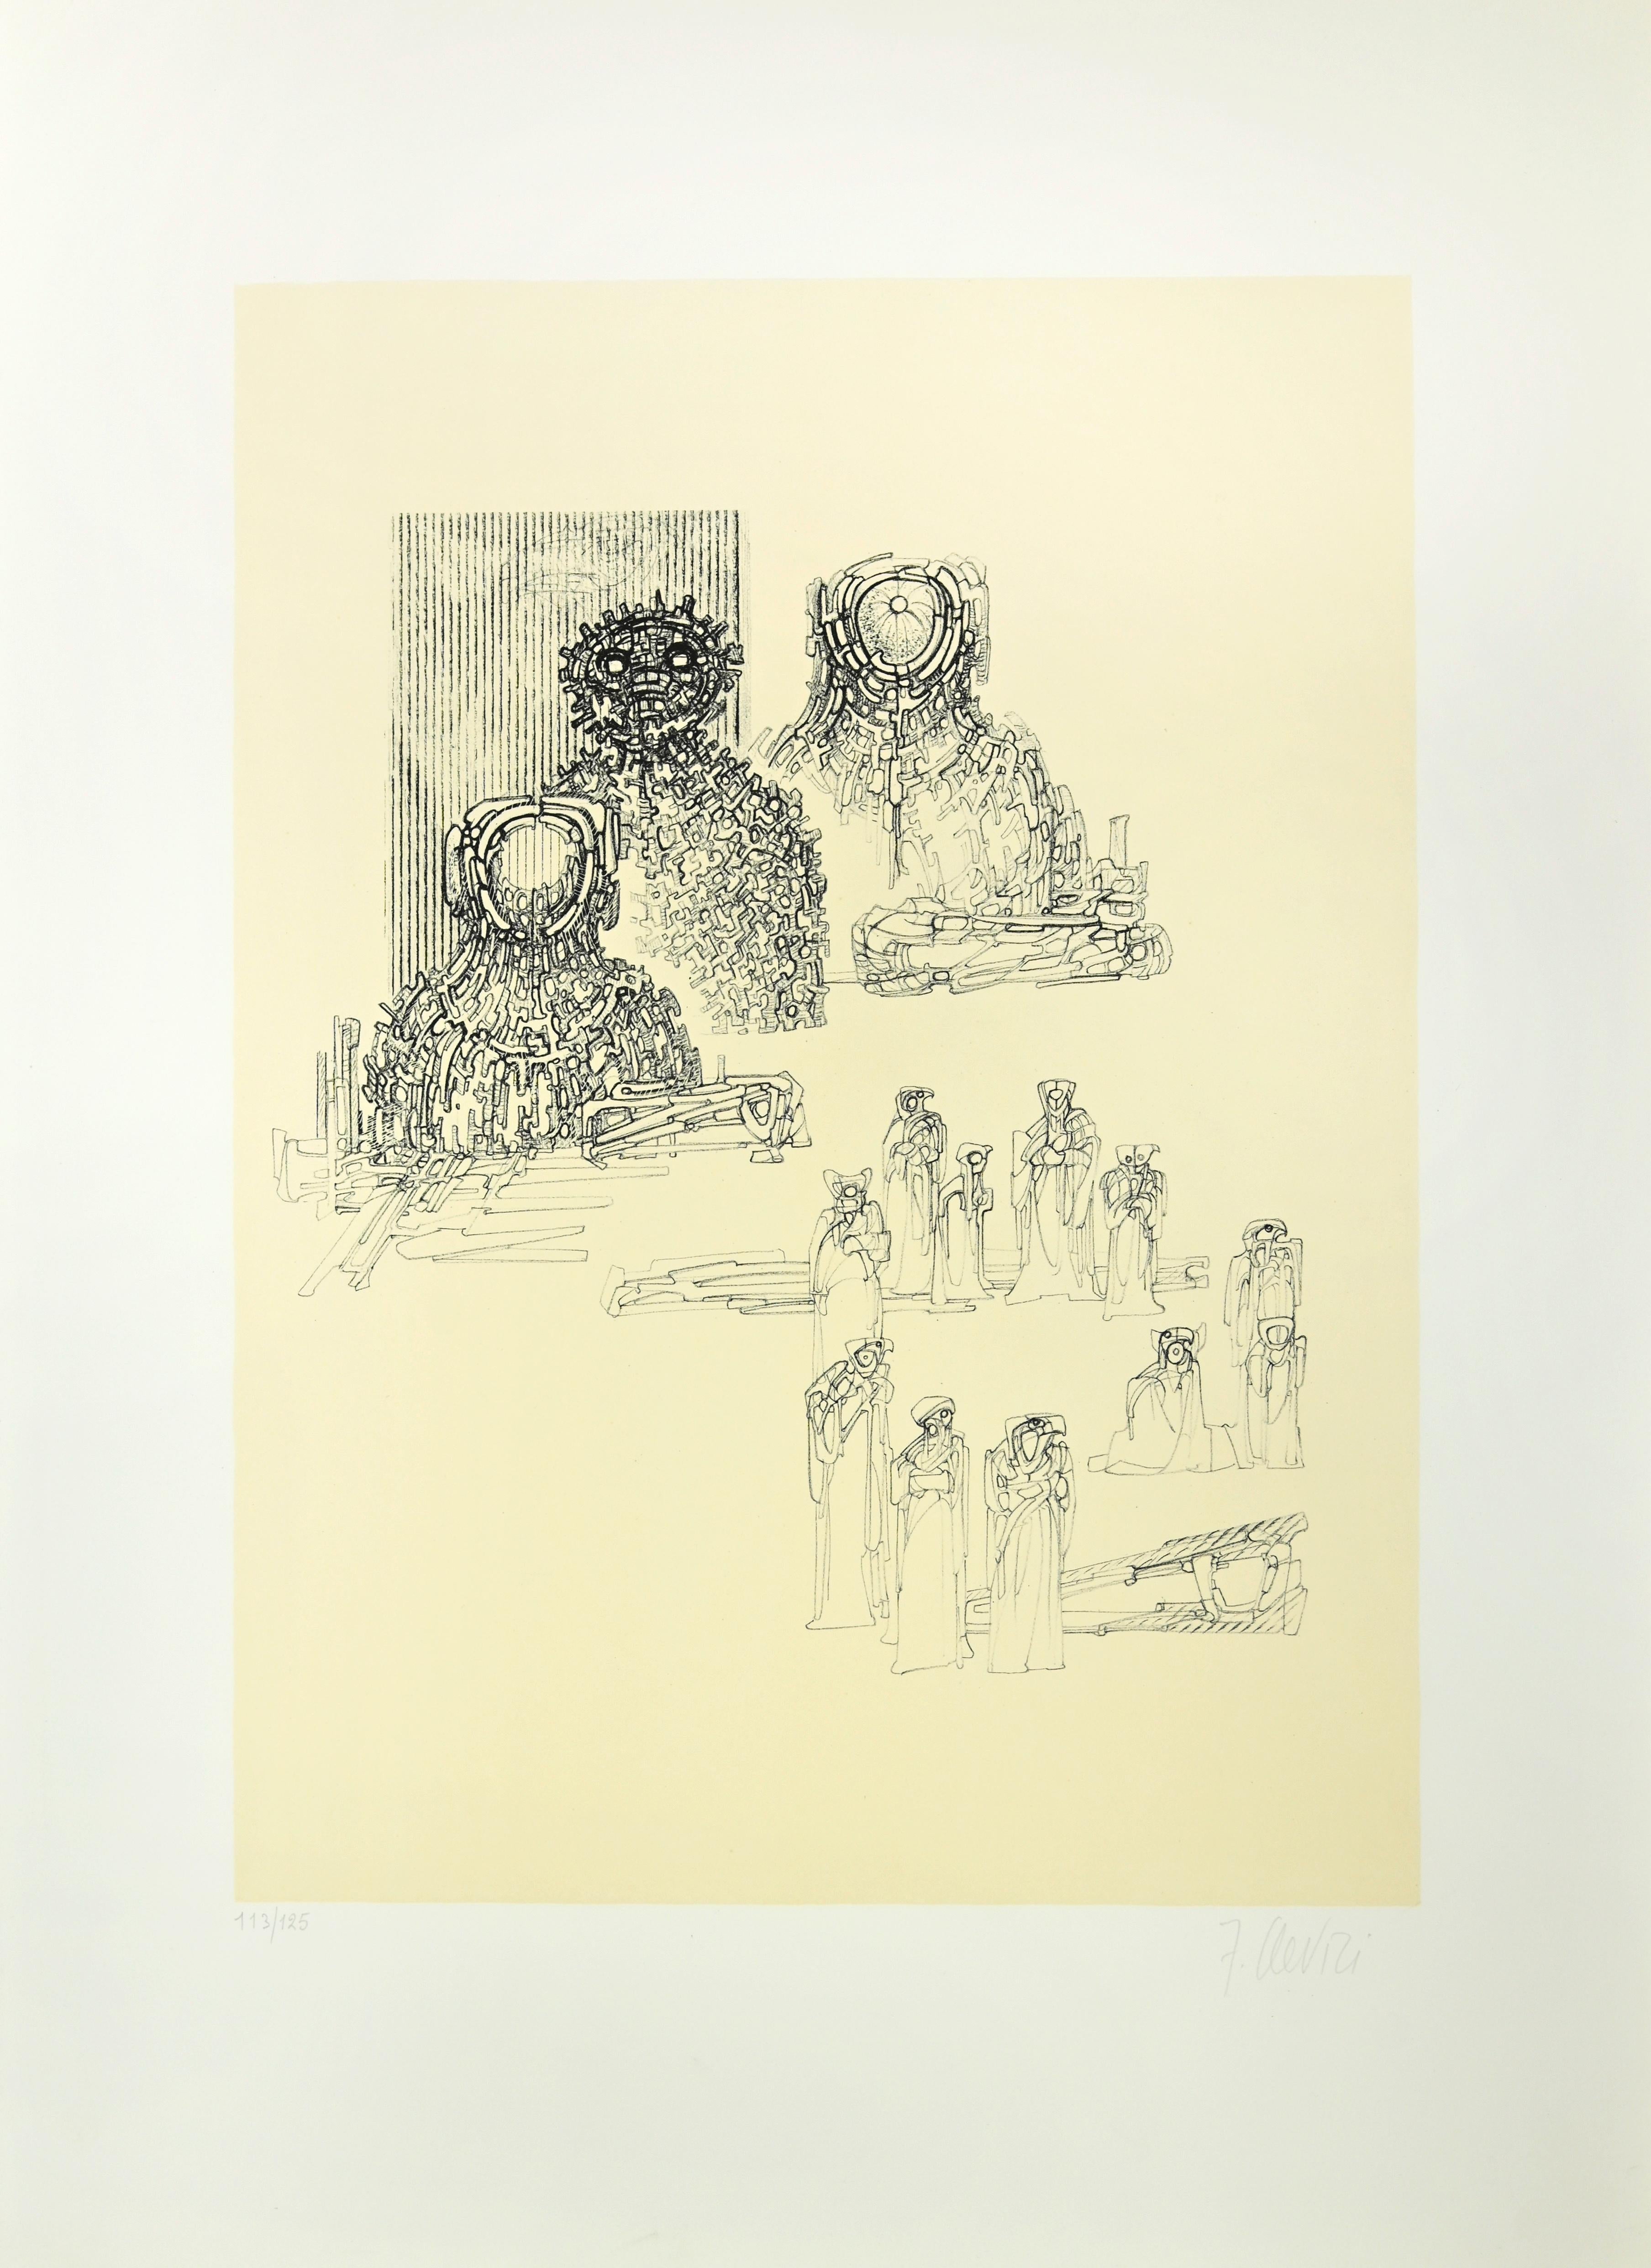 Gestural Composition is a print realized by Fabrizio Clerici in the 1970s.

Lithograph on paper.

Hand-signed and numbered, edition of 125 prints.

The artwork is realized through a range of various board lines and cross-contour lines through rigid